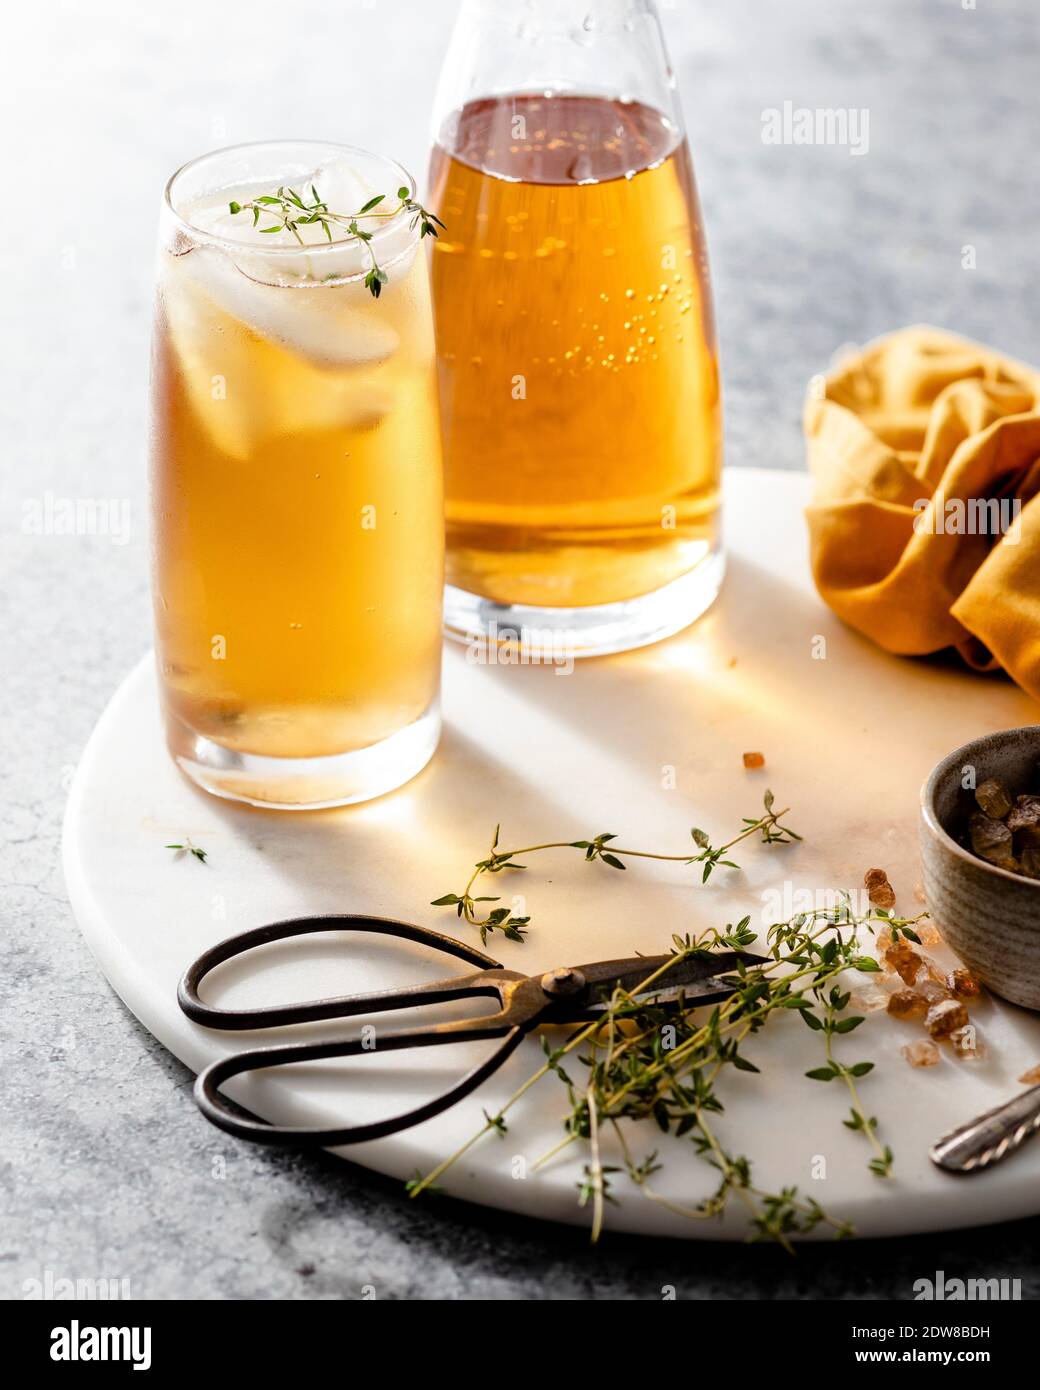 Yellow iced tea with Thyme Stock Photo